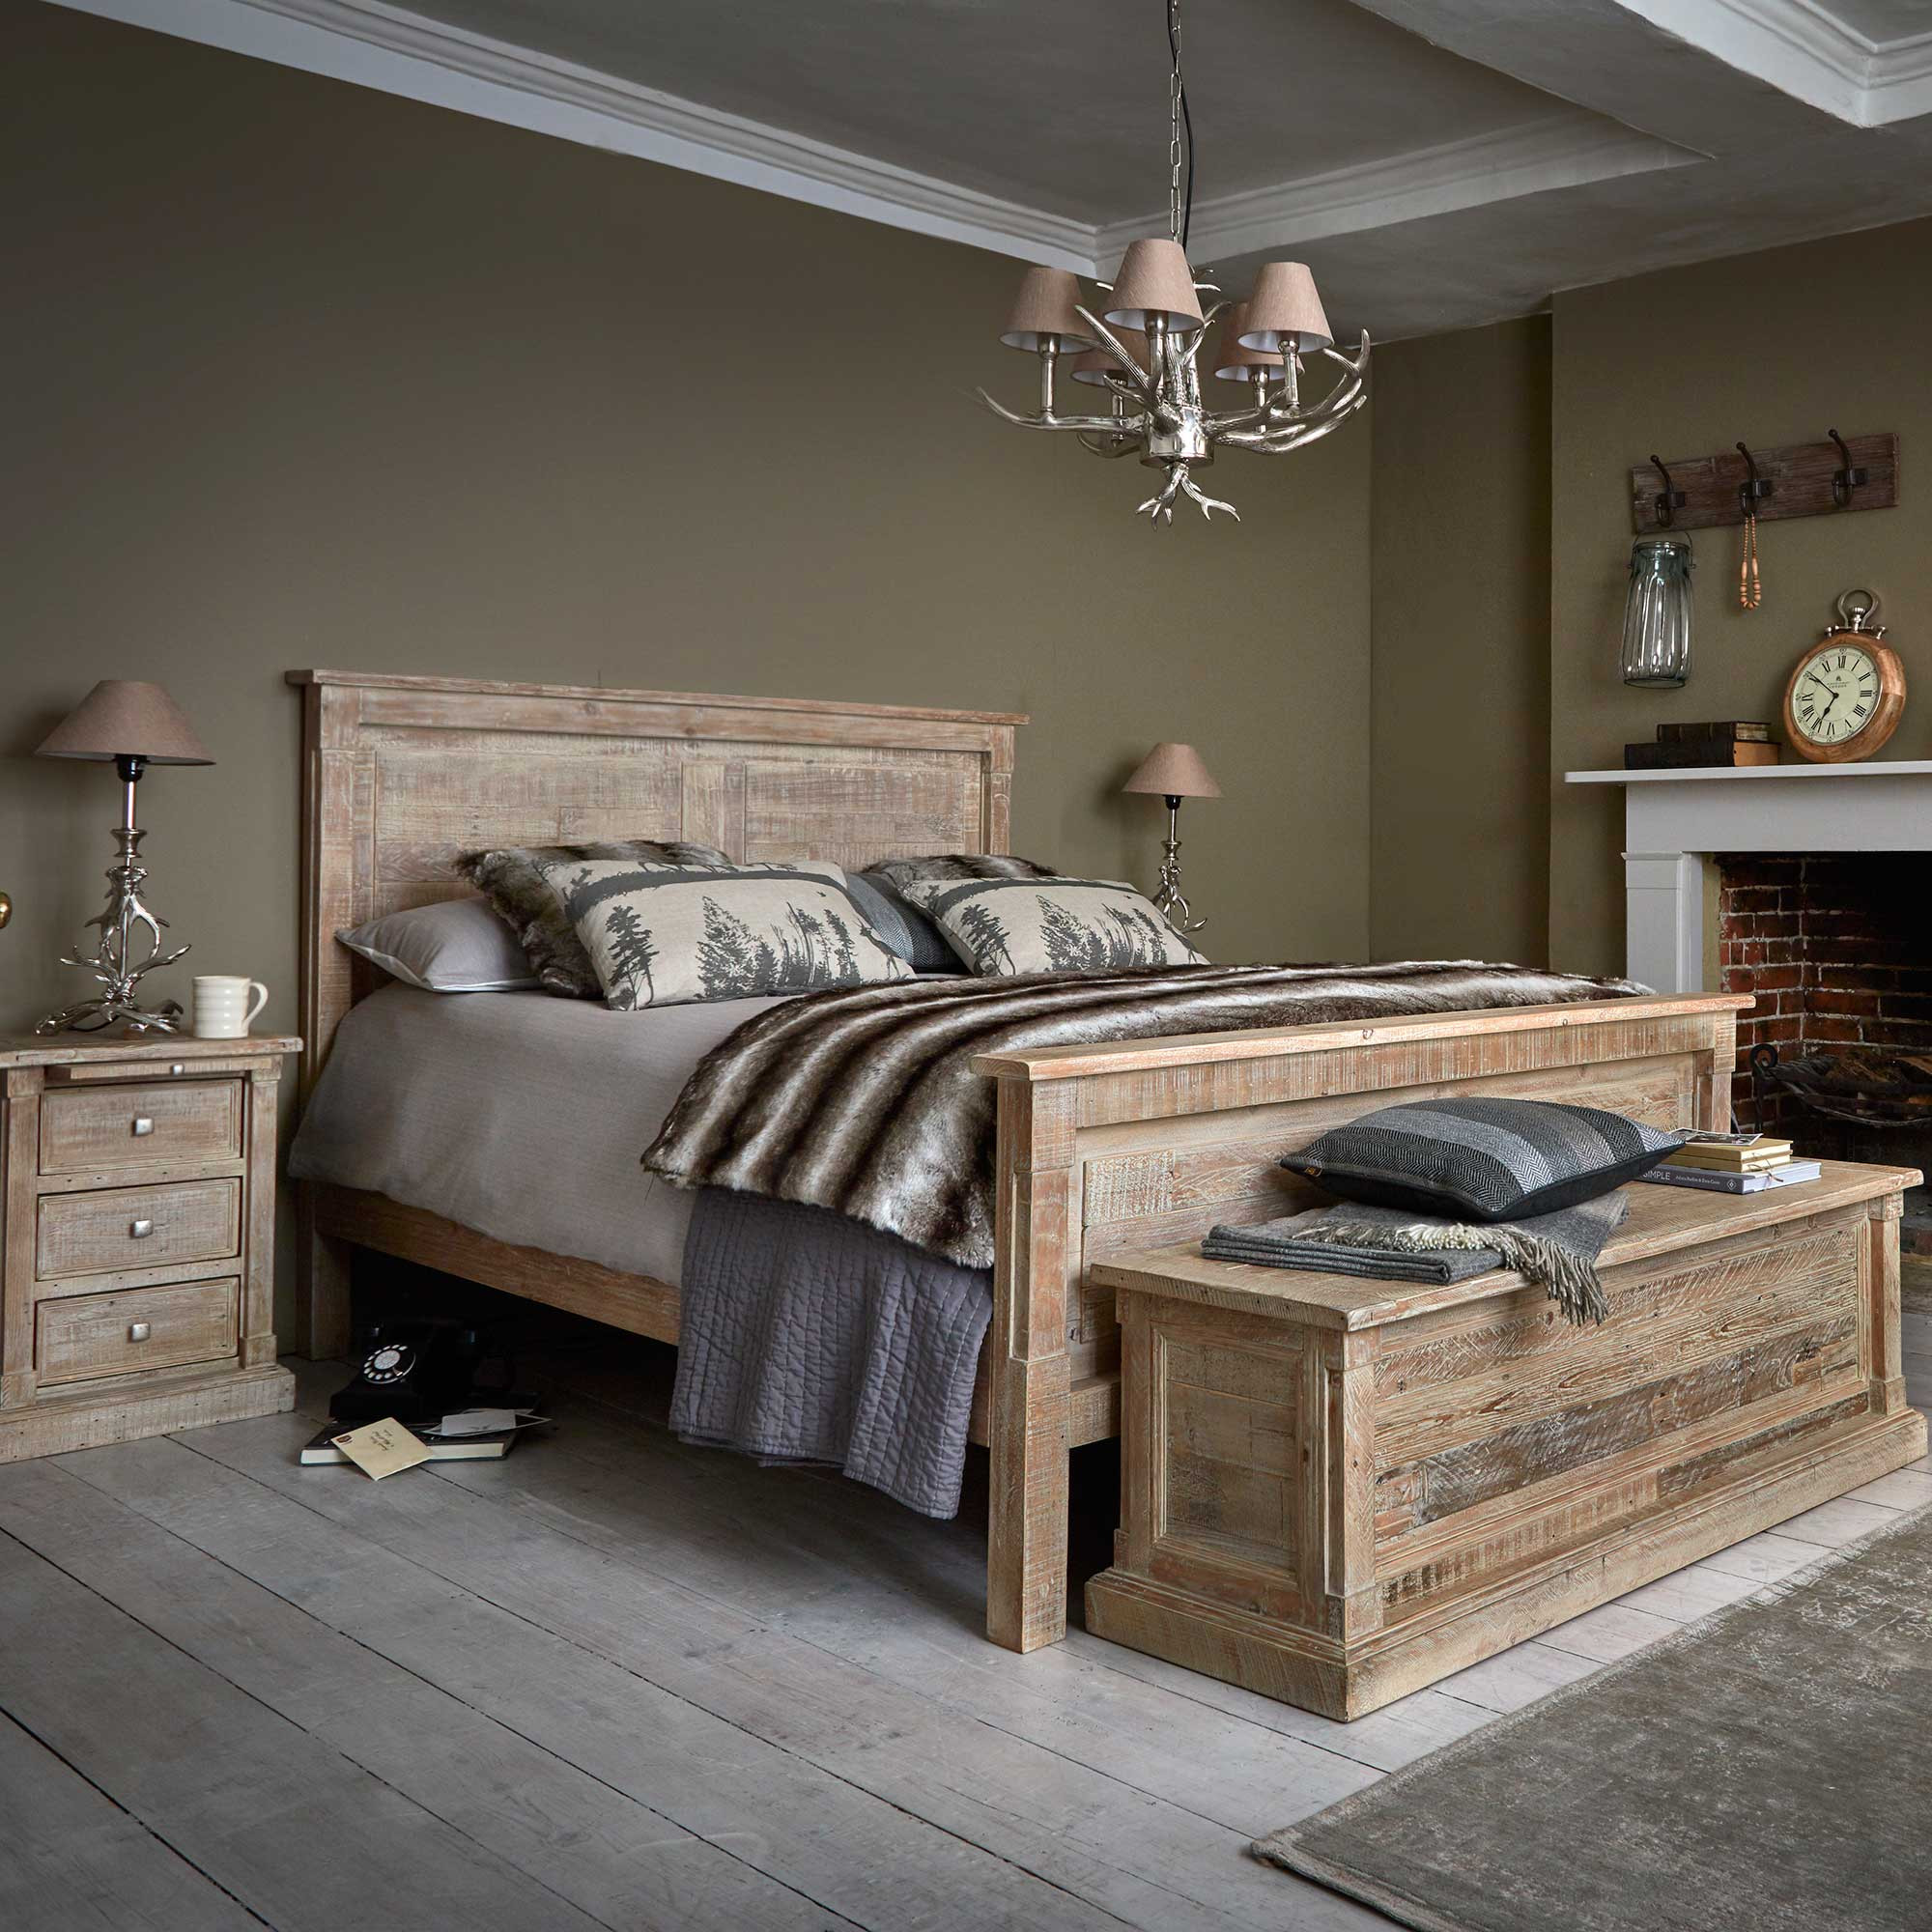 Rustic Wood Bedroom Set
 Bring in the New with our Winter Sale Picks Your House